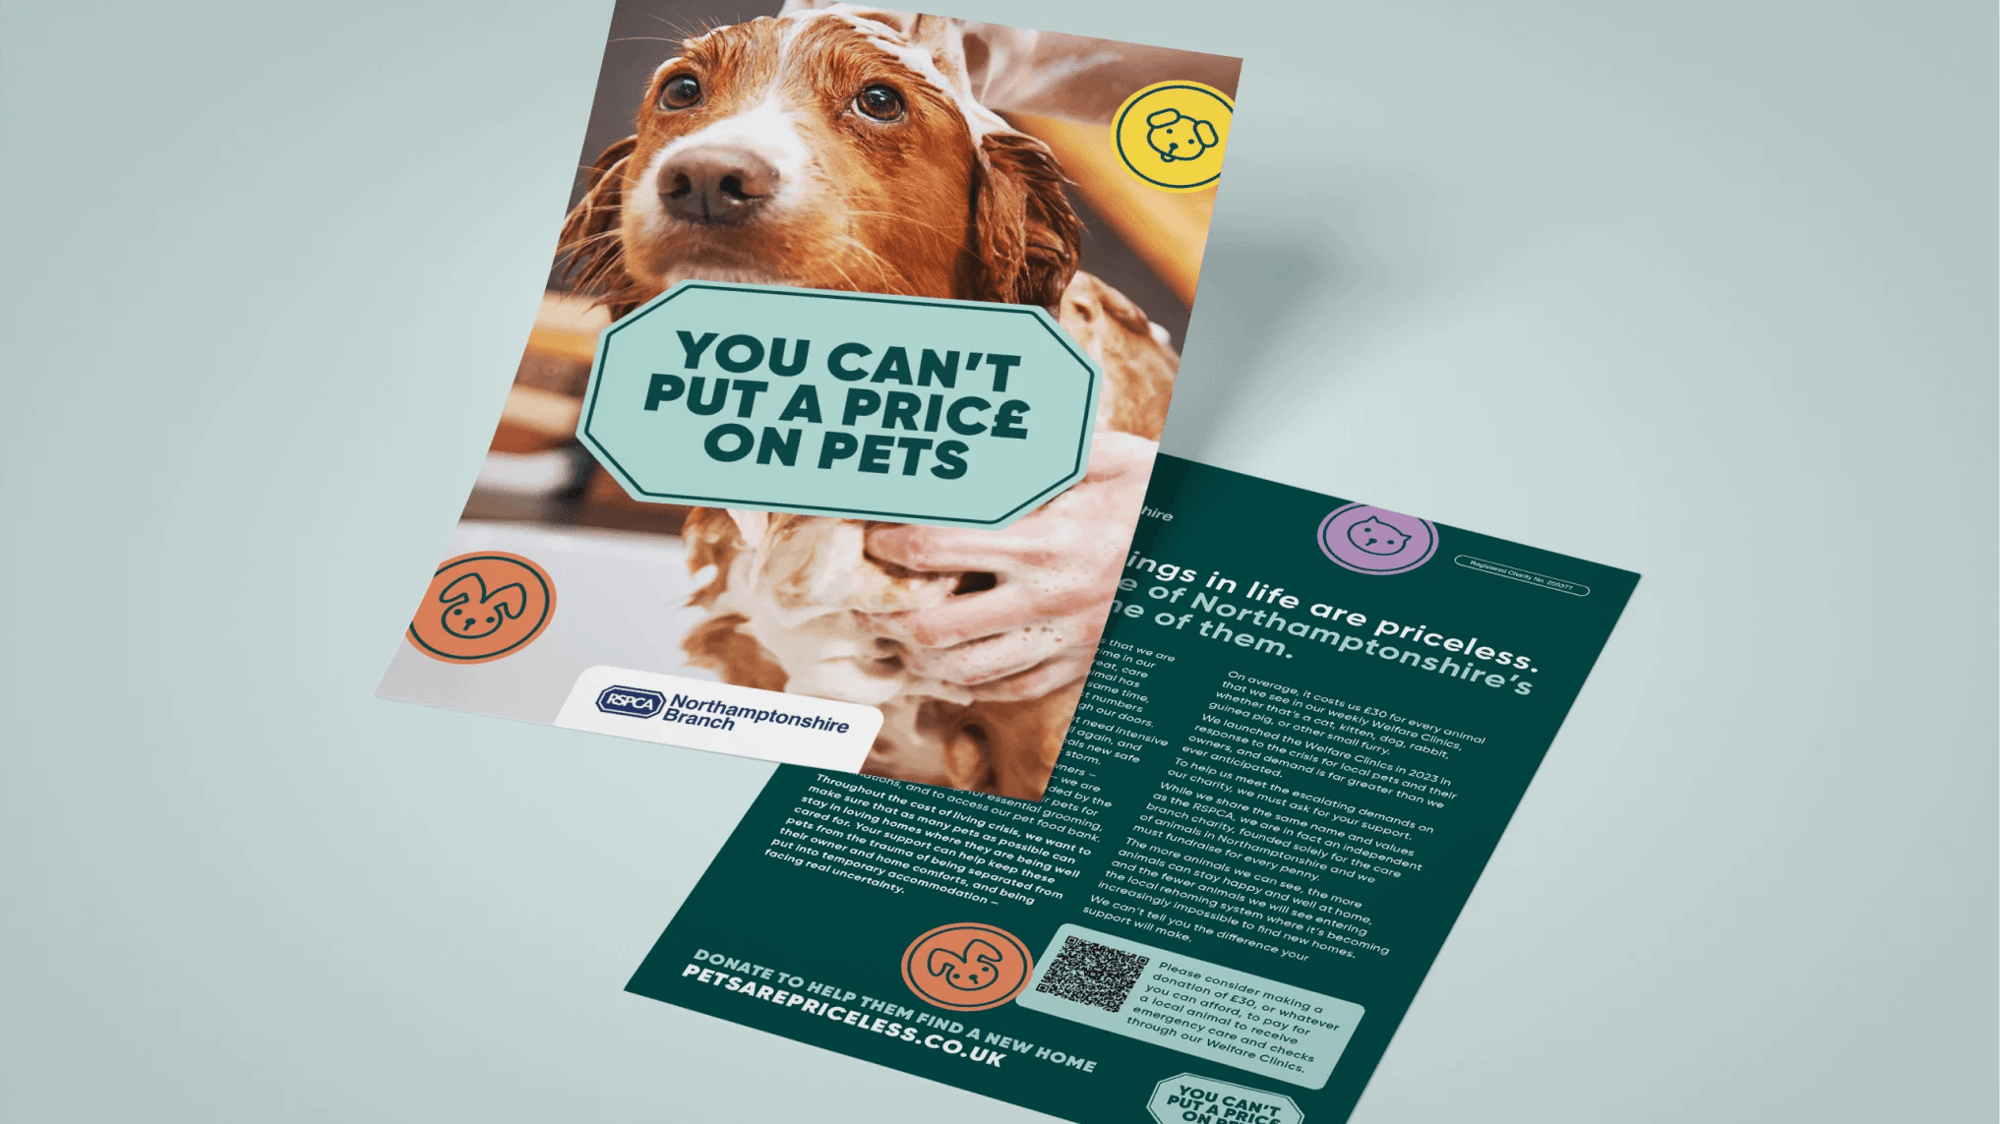 The double-sided campaign leaflet we designed.